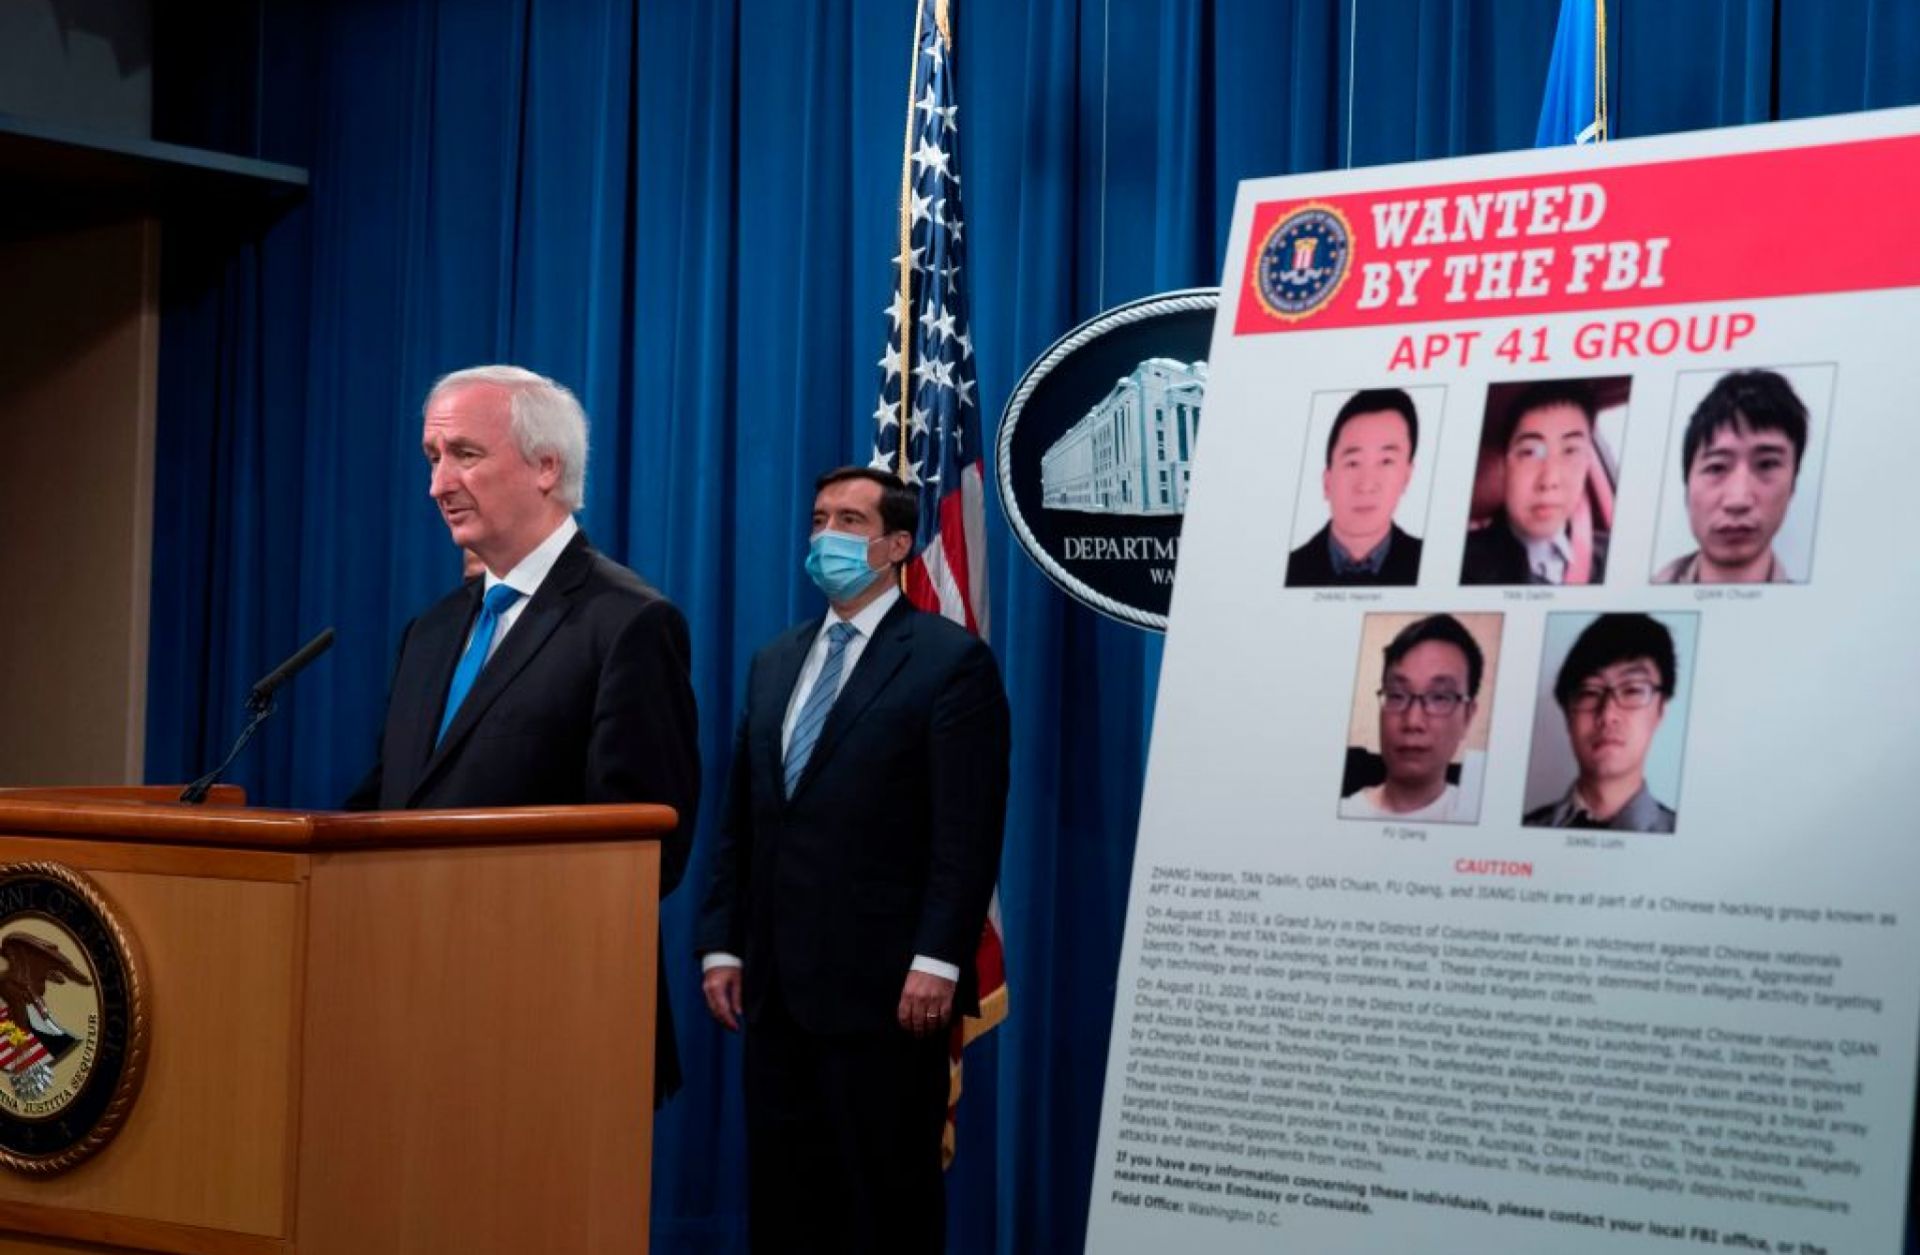 Deputy Attorney General Jeffery A. Rosen on Sept. 16, 2020, at the Department of Justice in Washington talks about charges and arrests related to computer intrusion campaign tied to Chinese government the group called 'APT 41.'